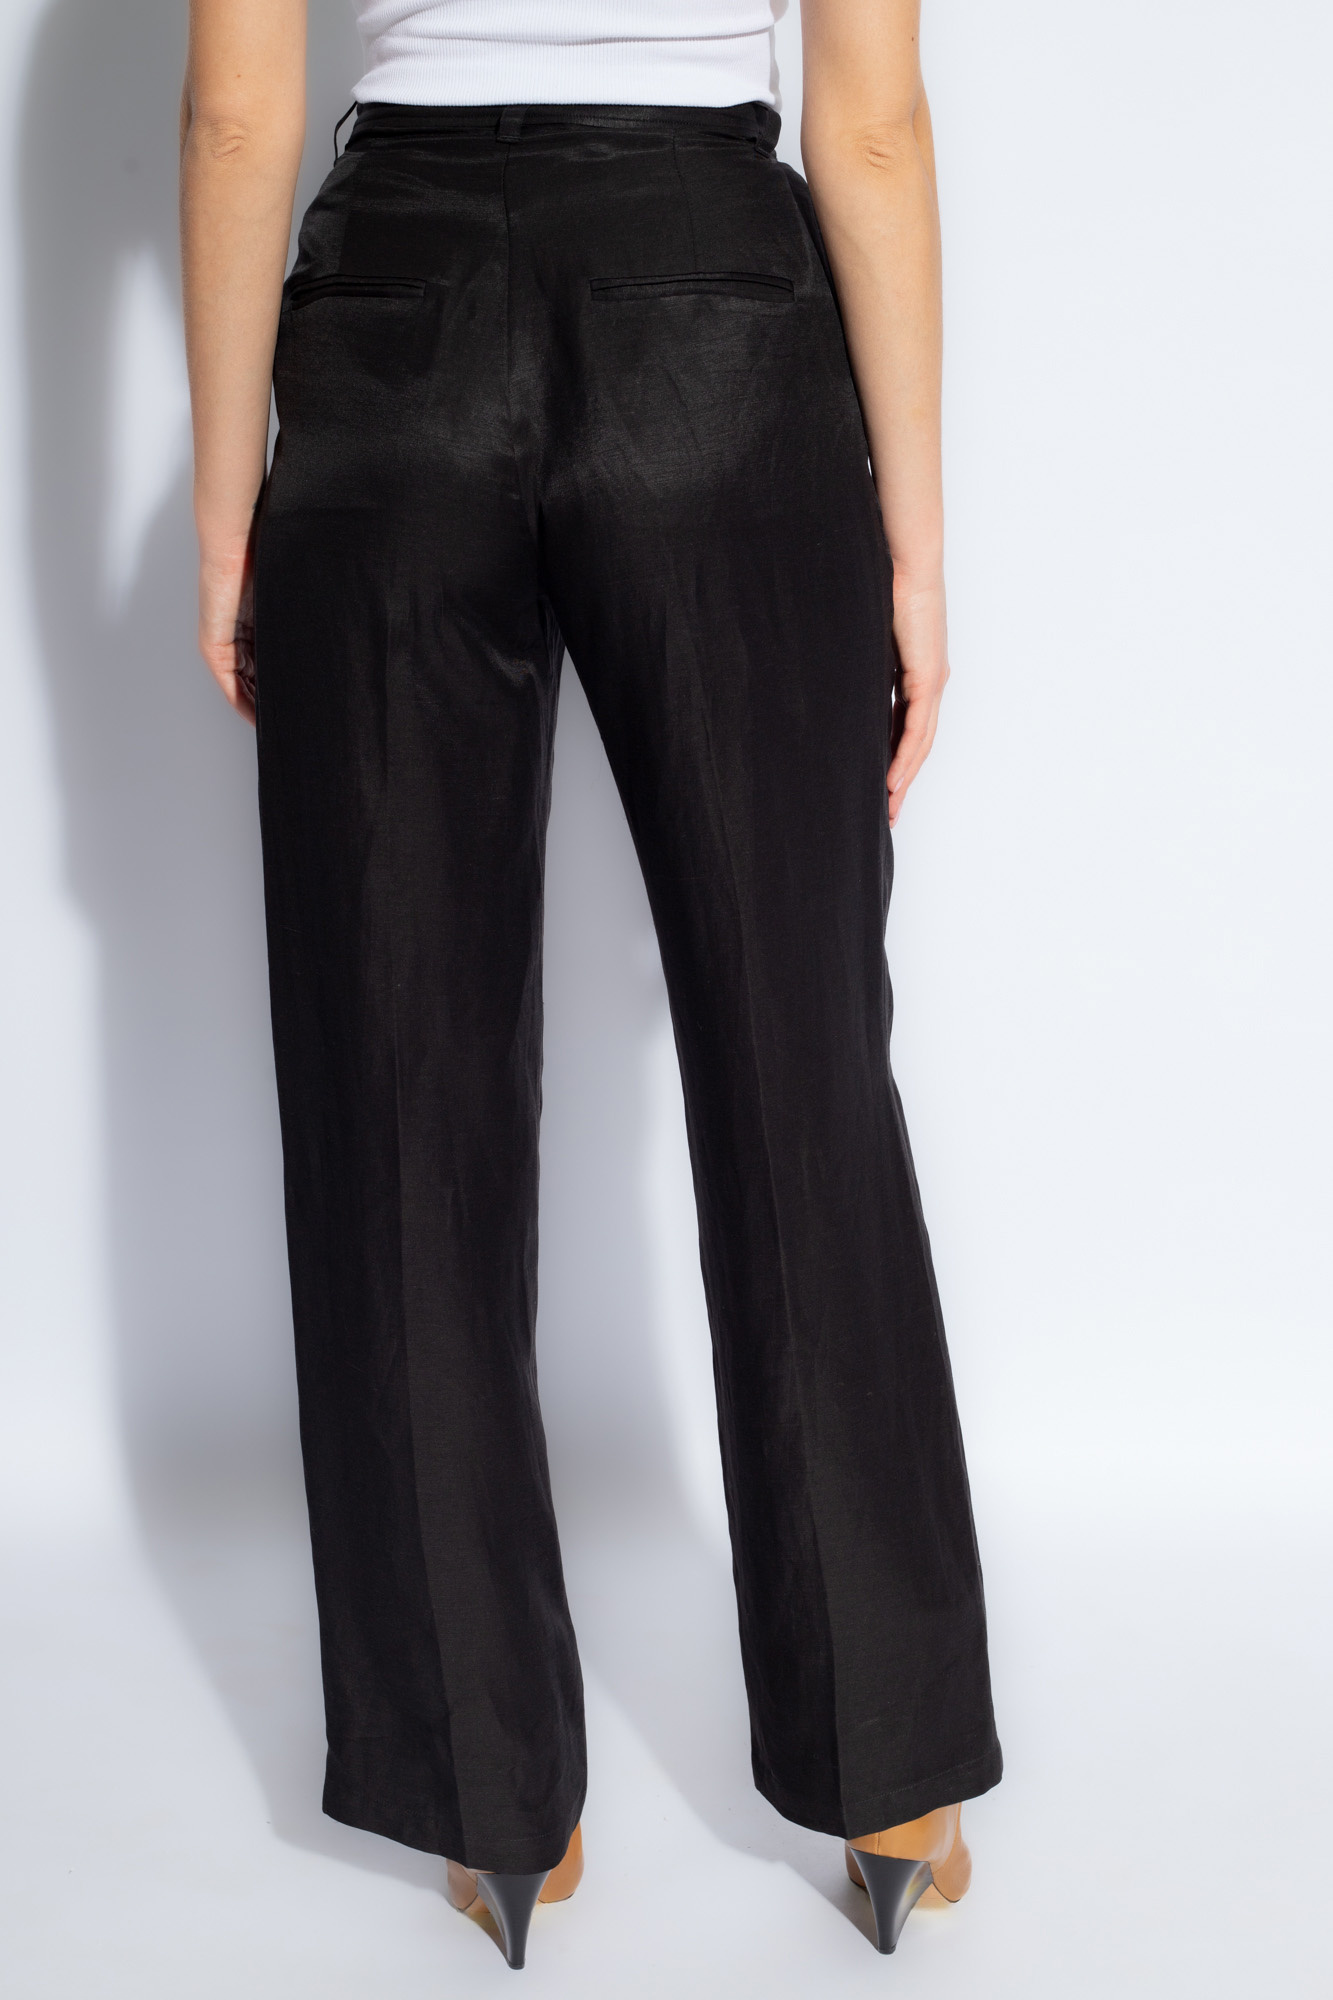 Anine Bing ‘Carrie’ high-waisted trousers